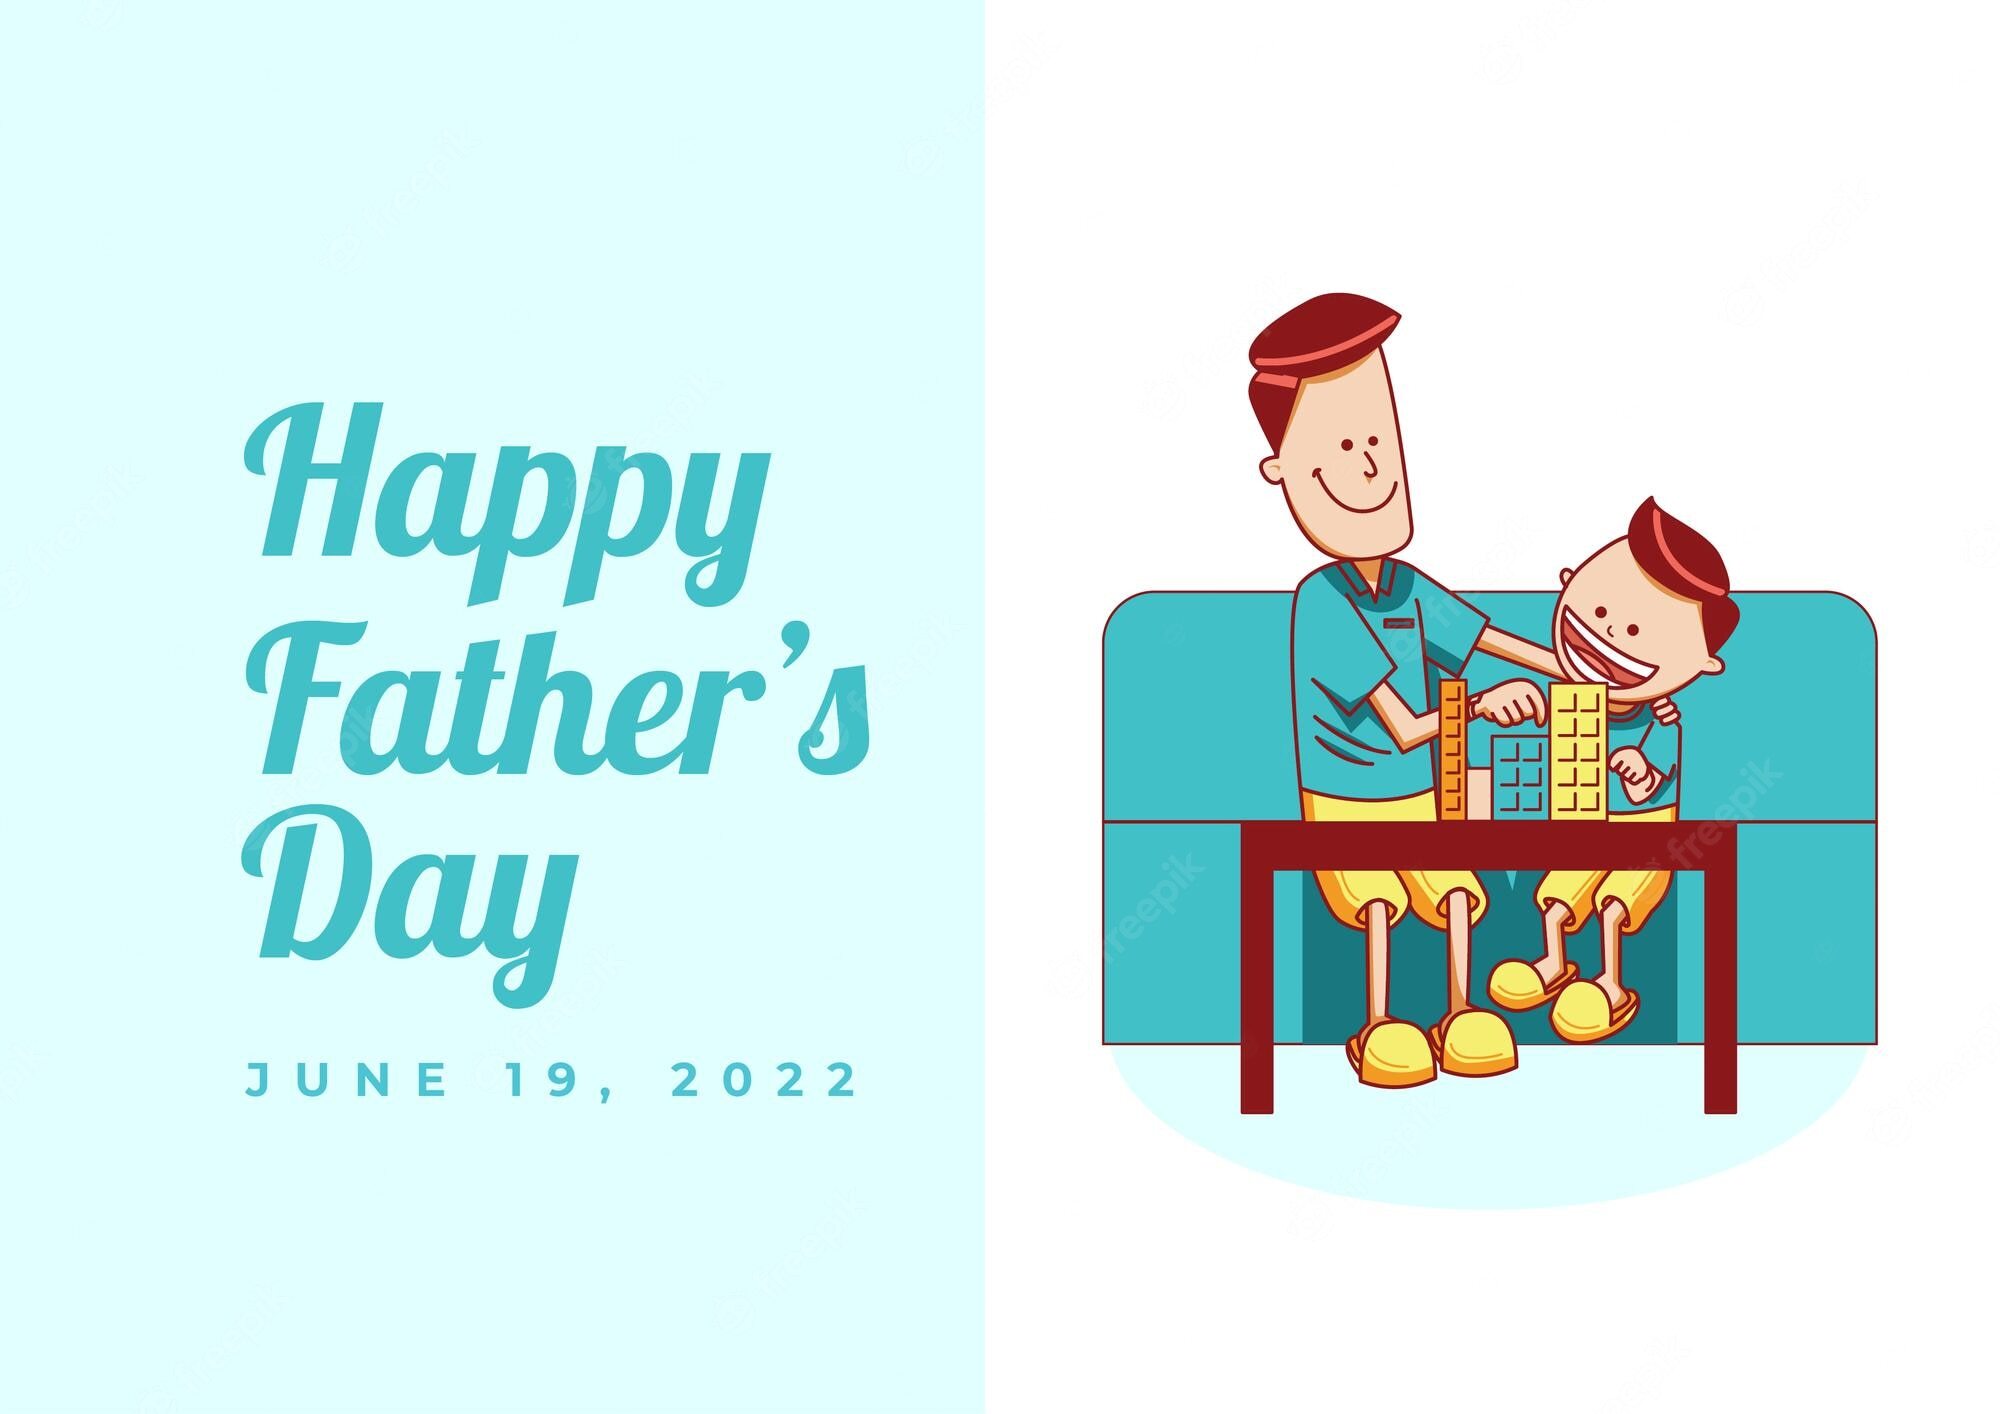 Happy Fathers Day 2022 – Celebrated on June 19